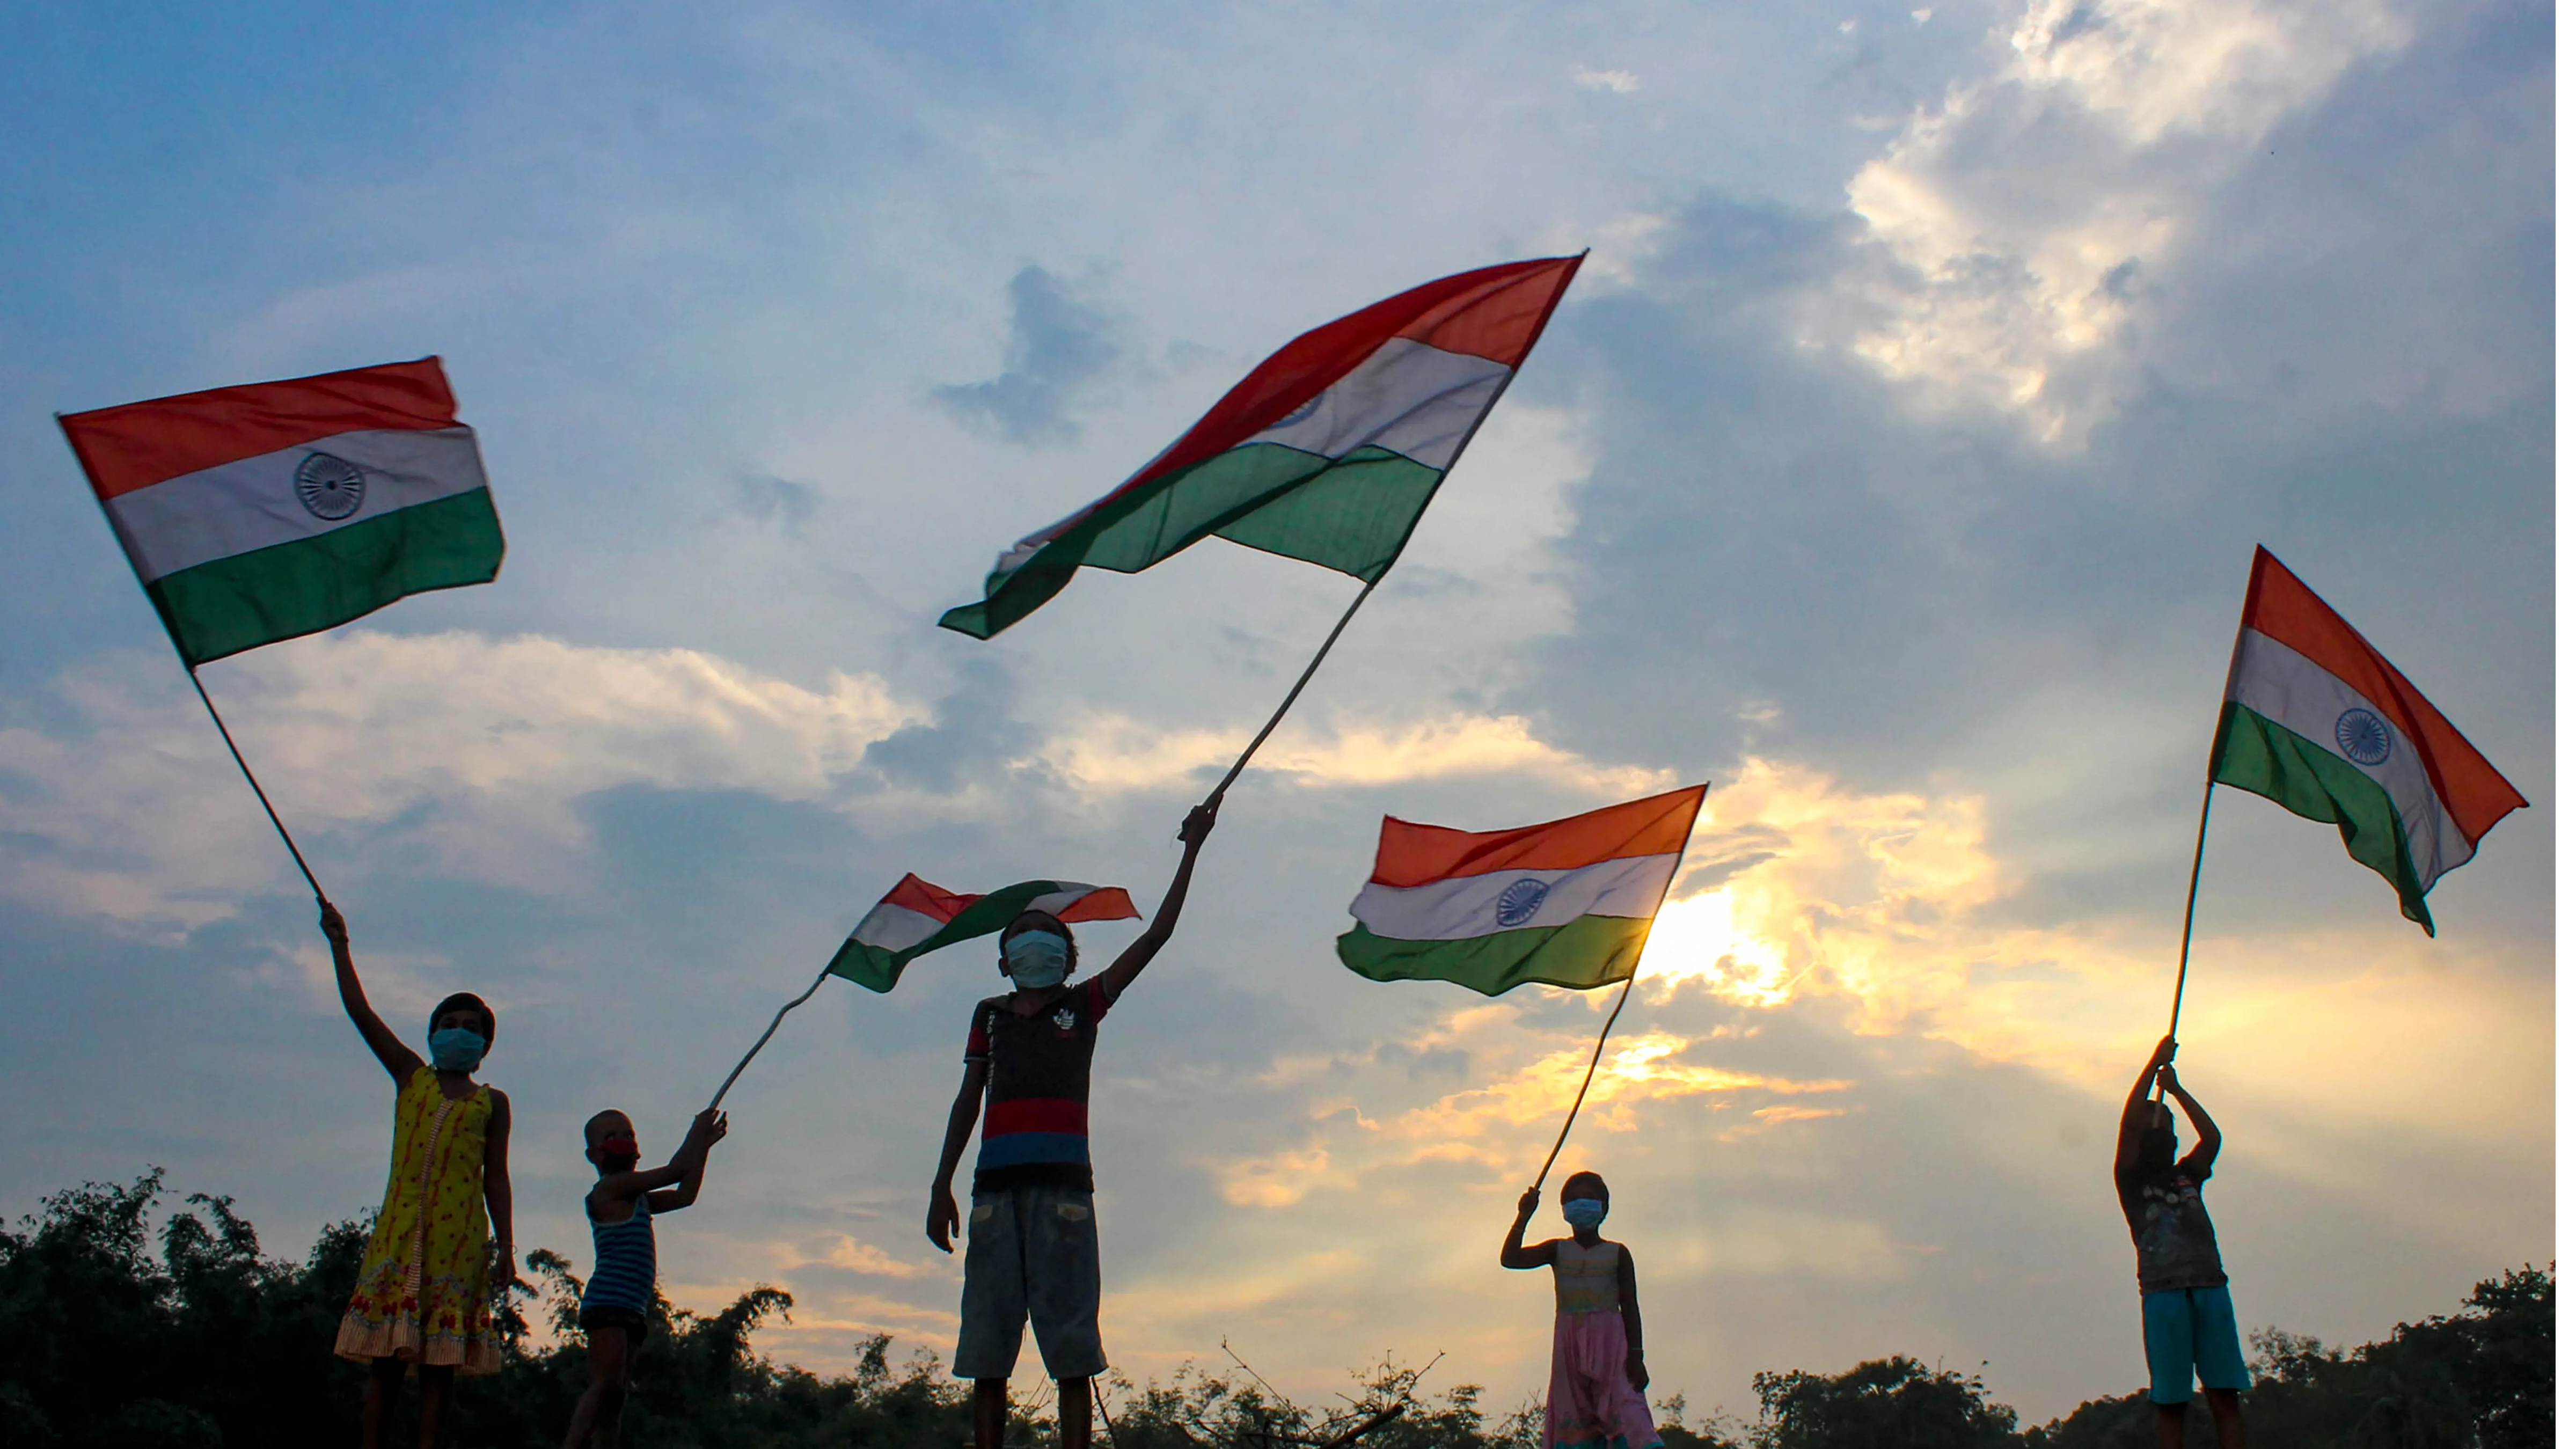 Independence Day 2020: Wishes, quotes, images you can send to celebrate freedom